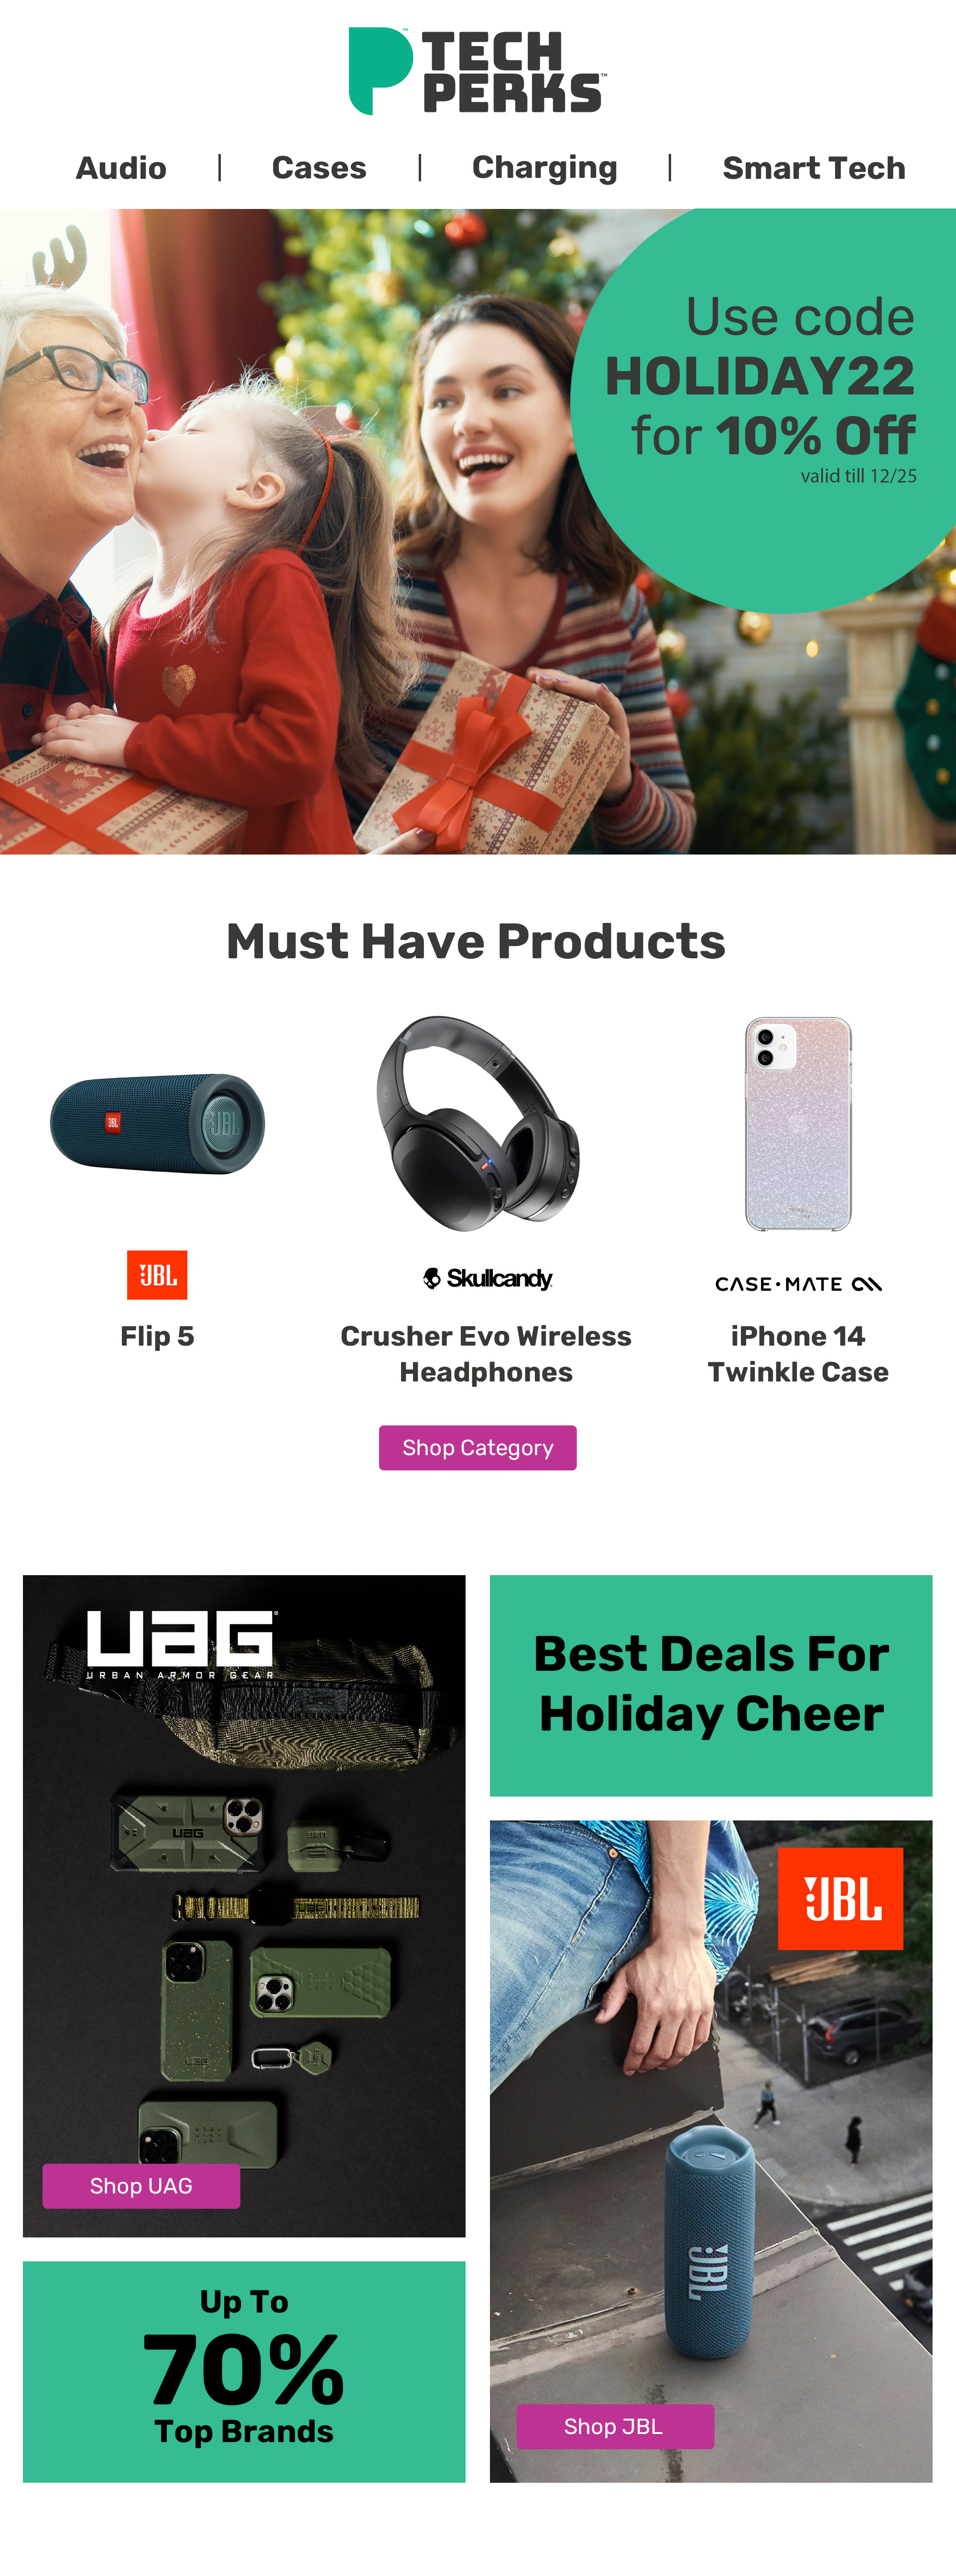 Tech Perks Marketing Email